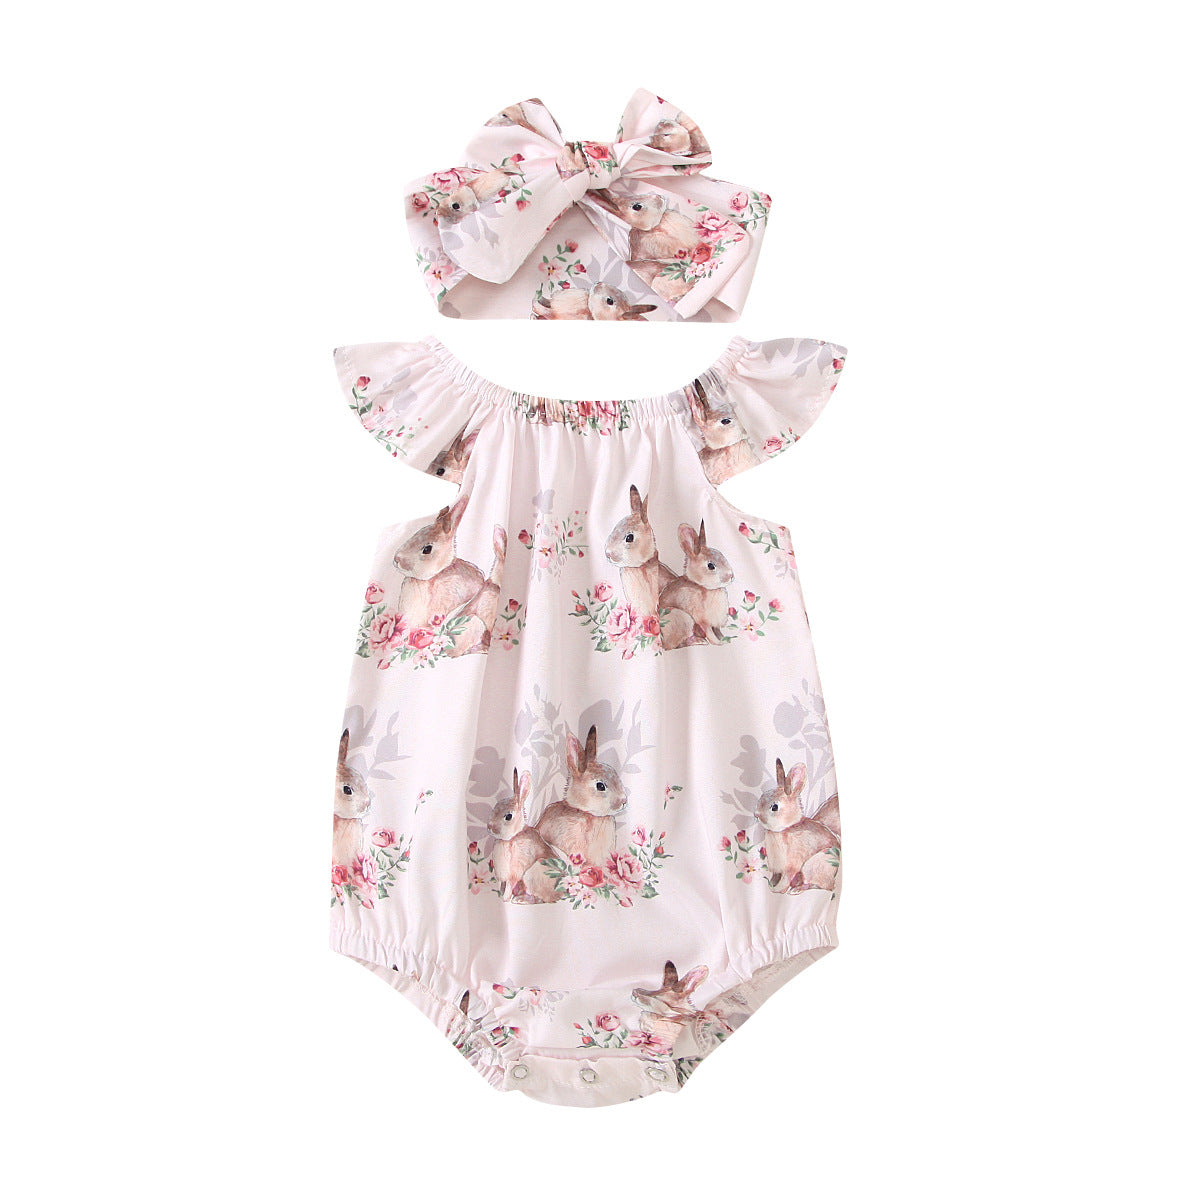 Baby Girls 1 One-piece Garment Summer Sleeveless Bunny Easter Egg Printed Wholesale Baby Boutique Clothing